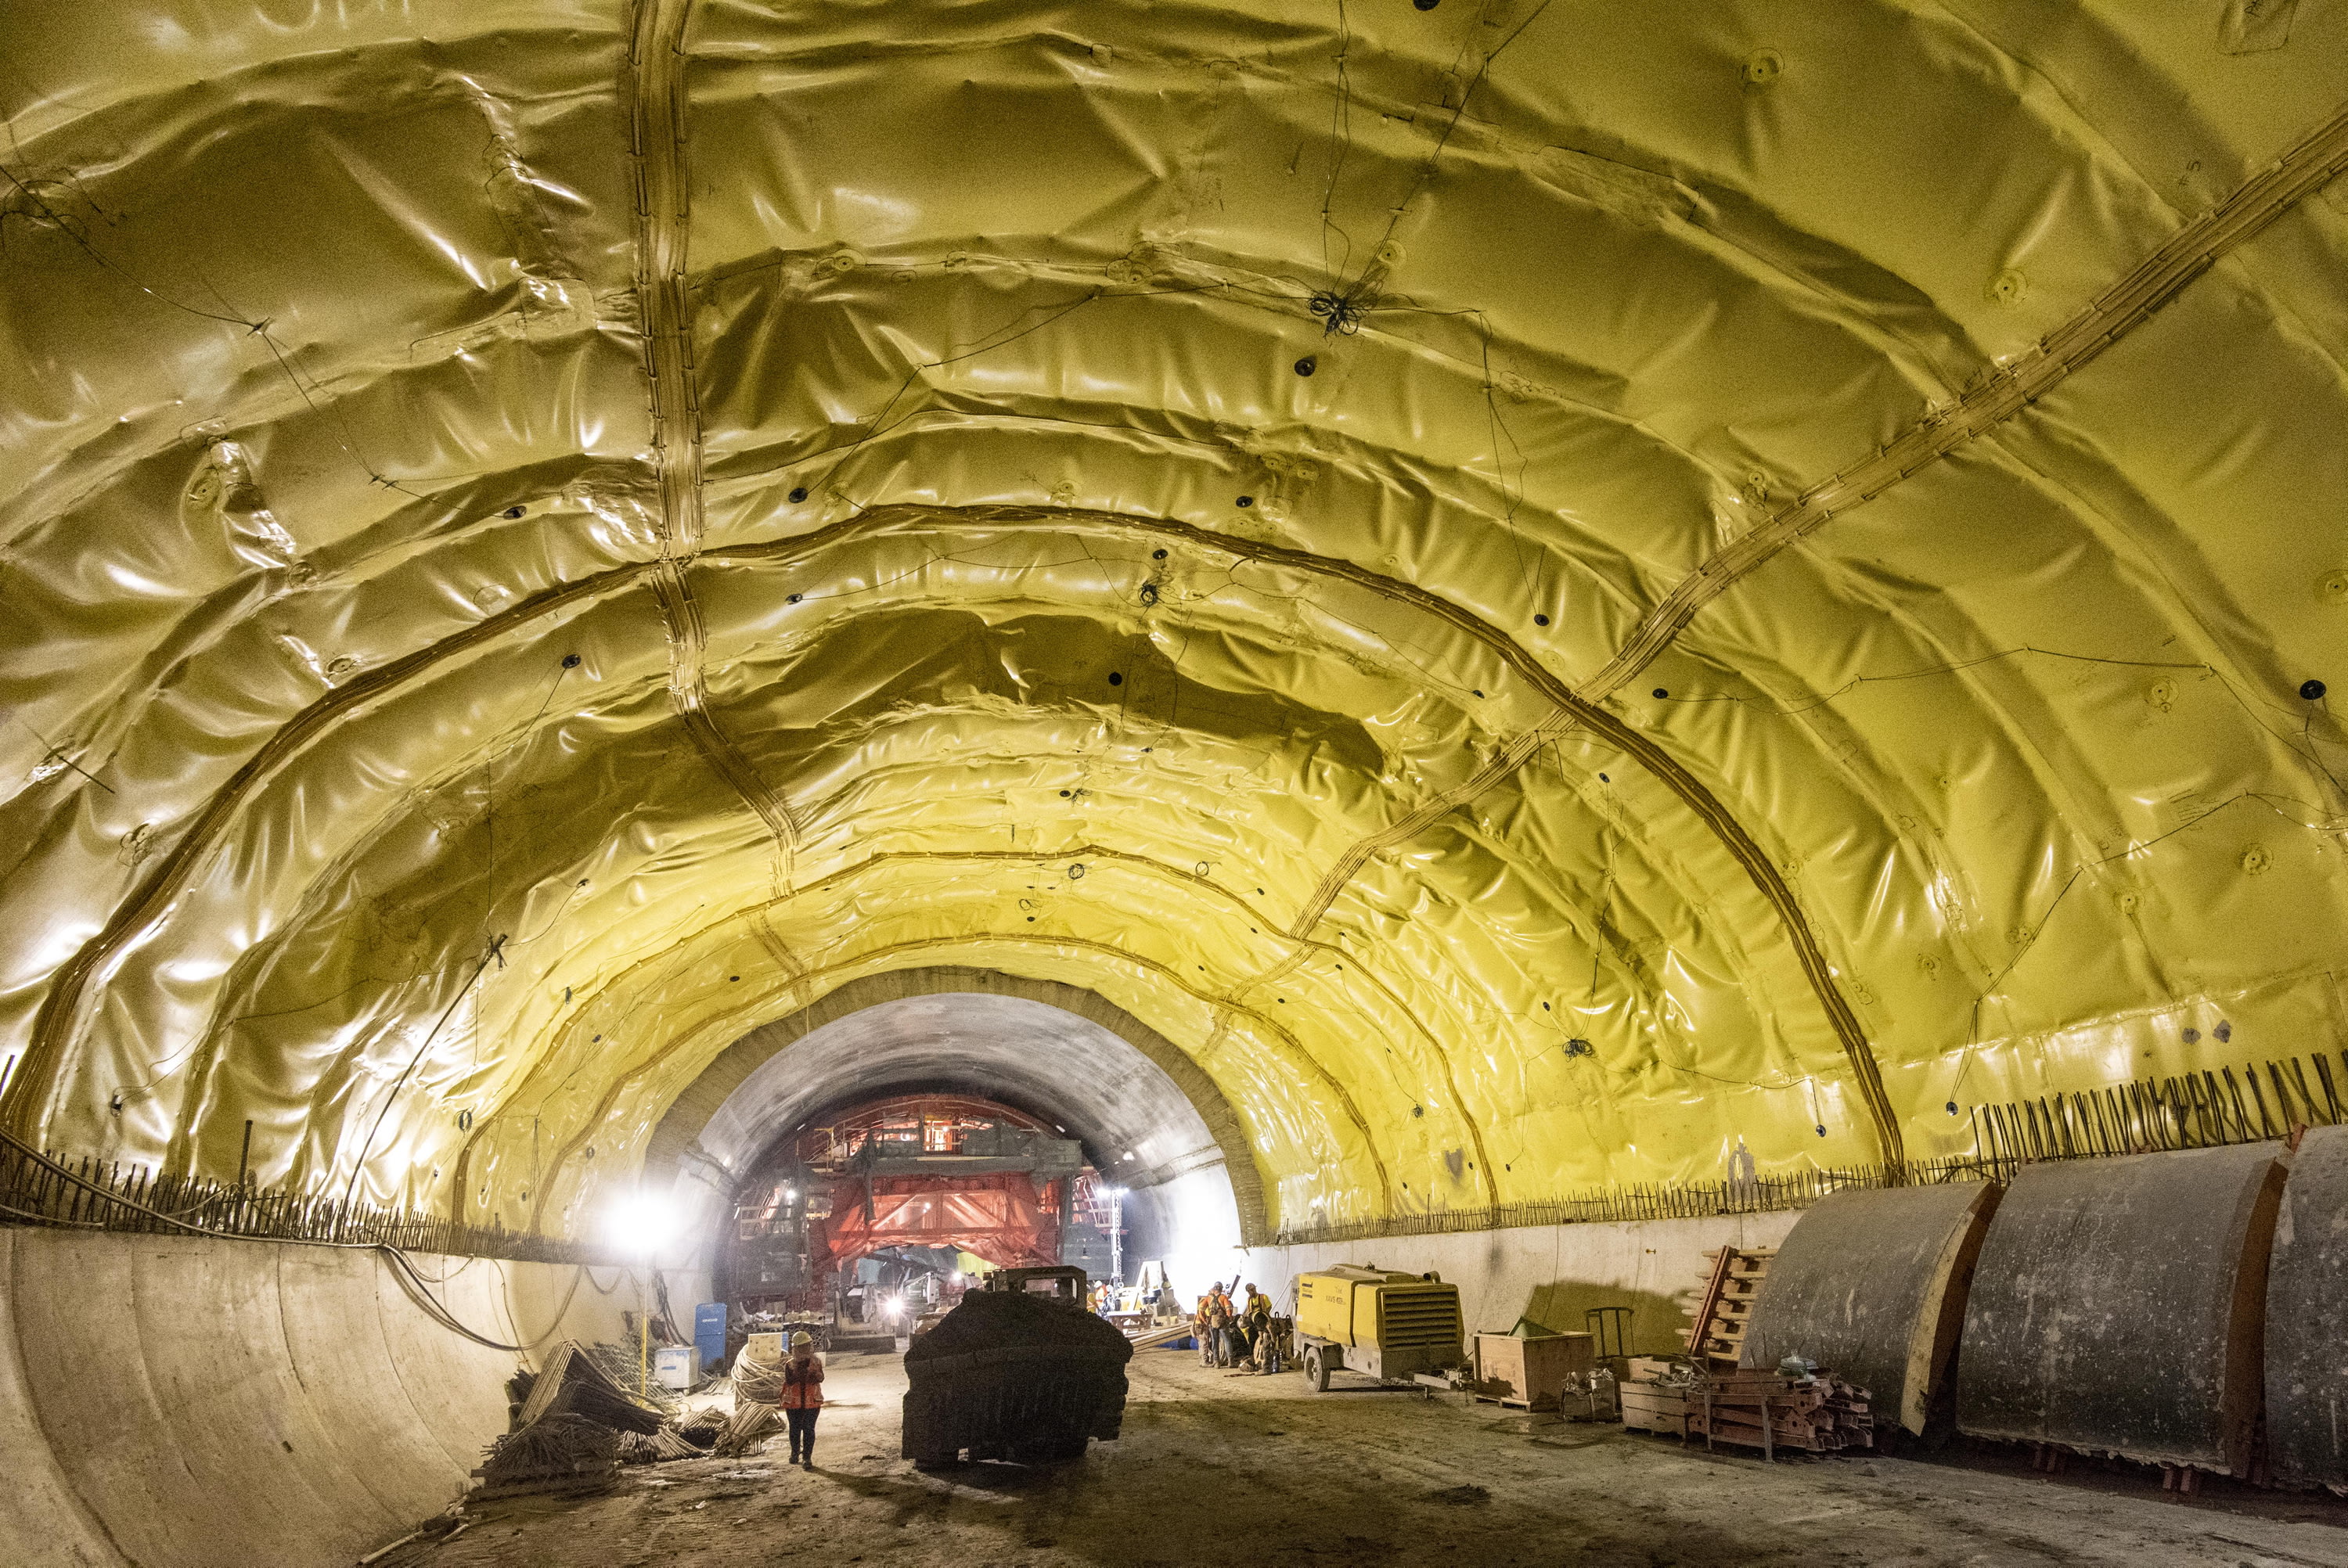 A tunnel is seen shieled by a yellow, fabric-like waterproof coating.